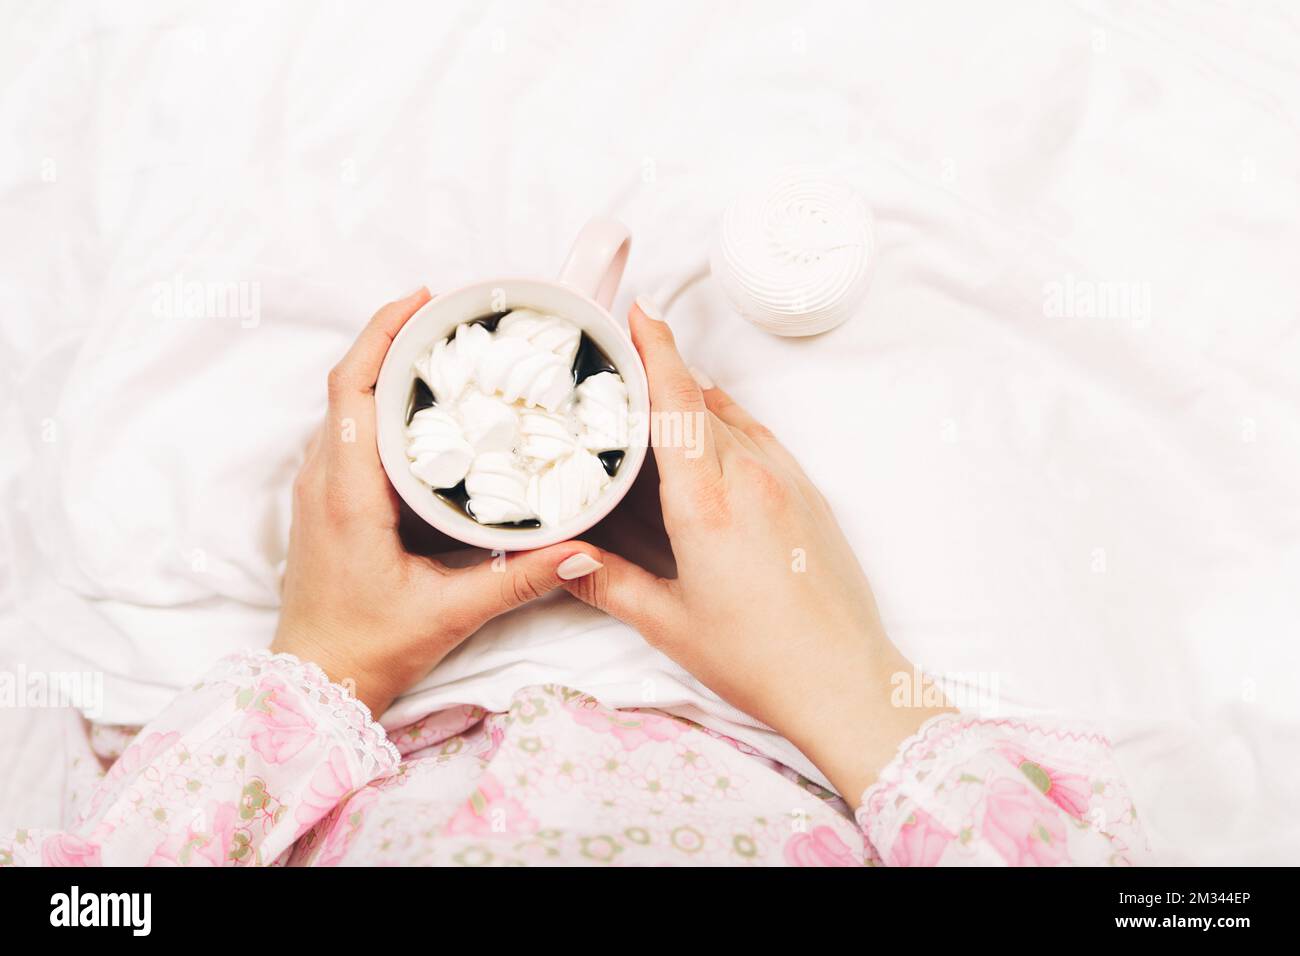 Female hands holding cup wih coffee and marshmallow.Provance romantic style.Women in bed.Top view Stock Photo